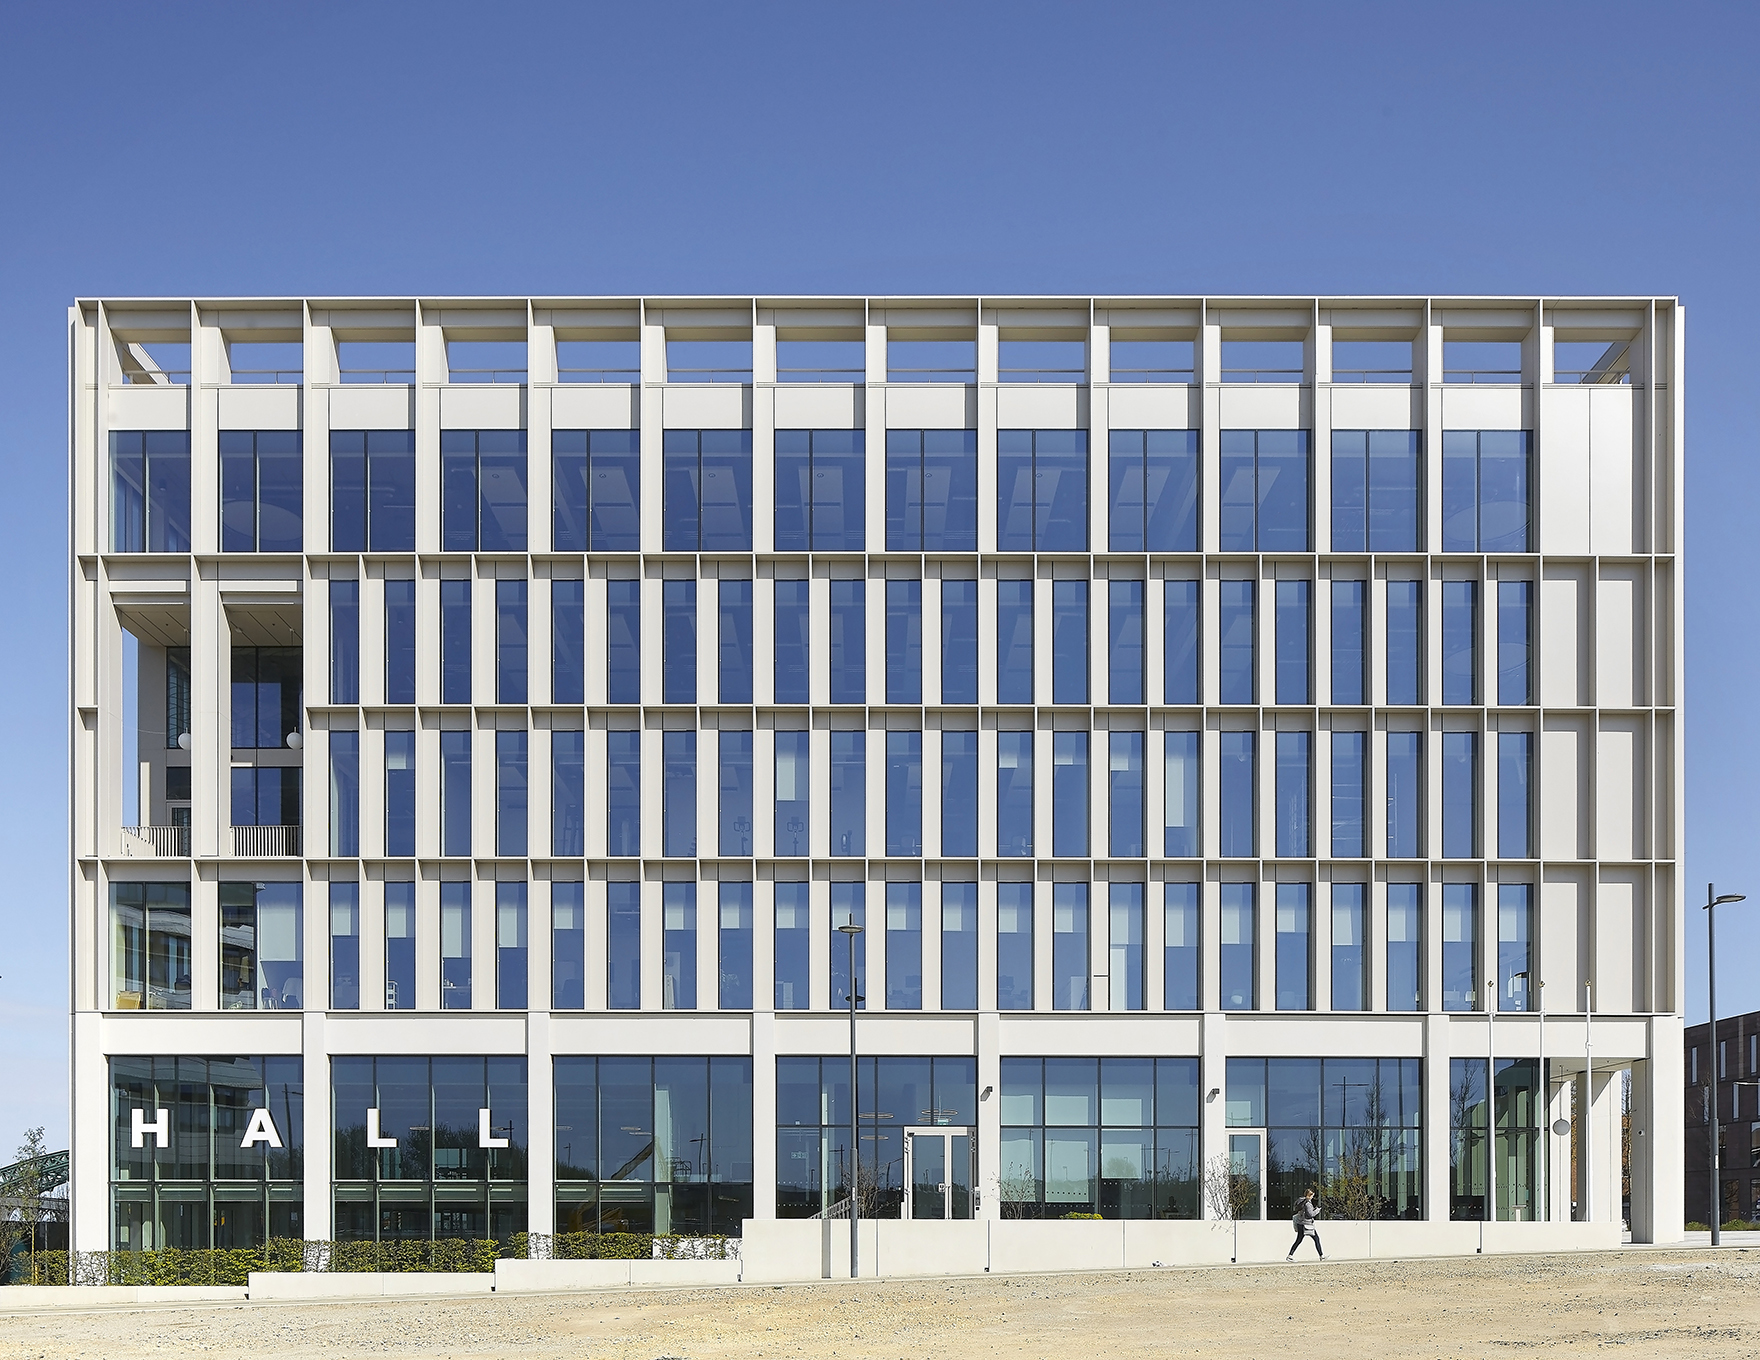 City Hall Faulknerbrowns Architects Sunderland Bco Awards Best Corporate Workplace Facade L